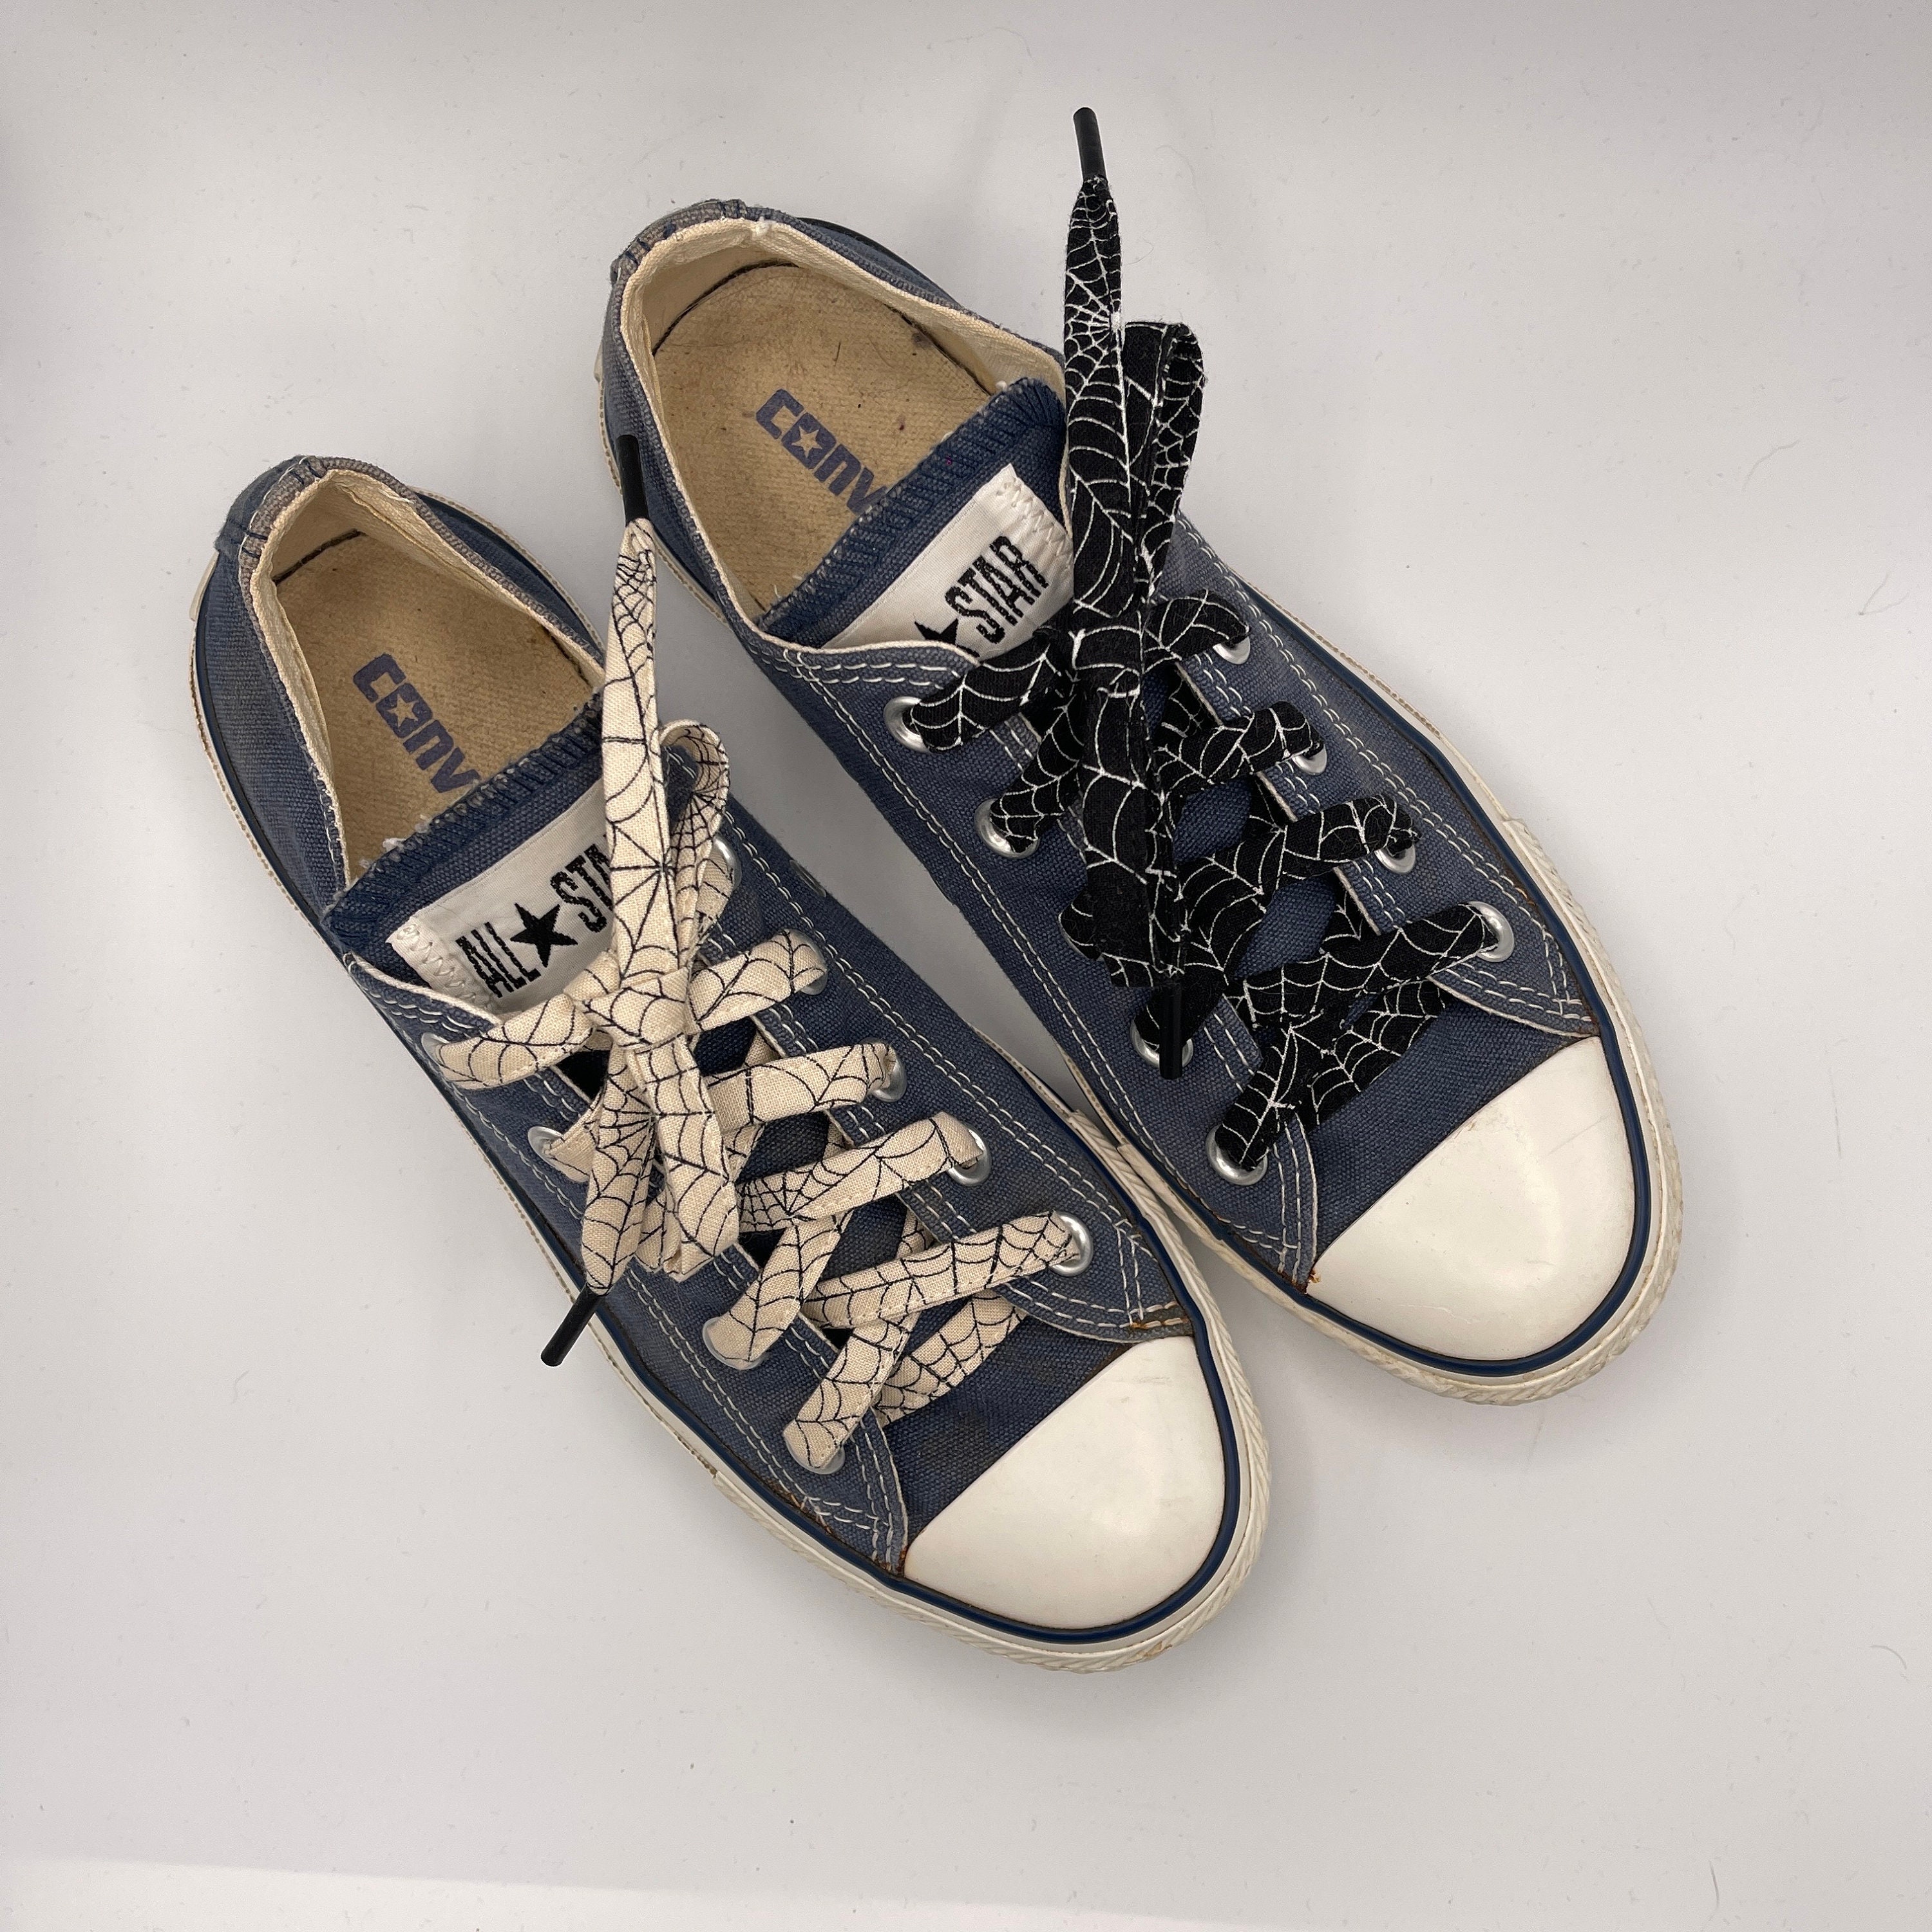 Paint Your Own Canvas Shoes Trainers Craft Kits, Kids to Adult, With Fabric  Paint and Fun Laces to Match You Design. 